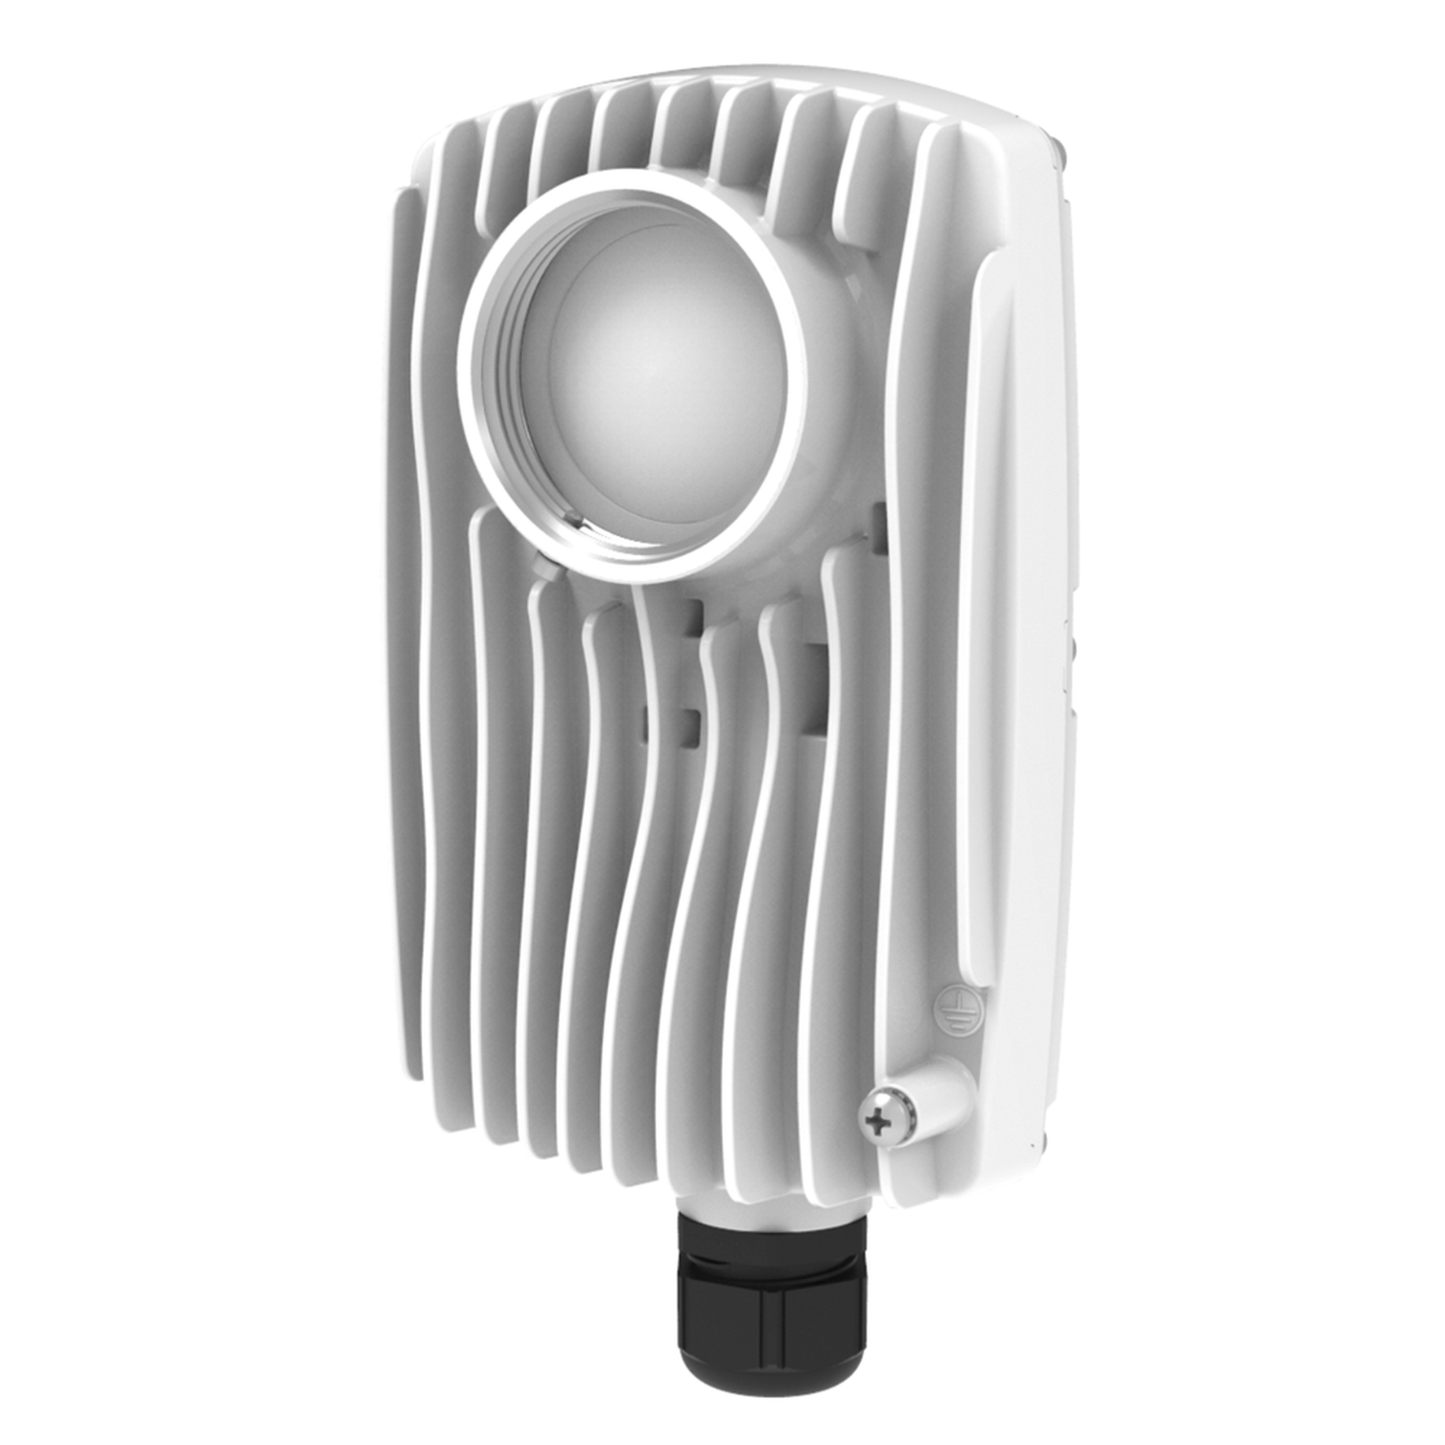 Modular Radio ("8 dB integrated antenna") up to 1.7 Gbps, (5.1 - 6.4 GHz), IP67, Automatic adaptation to the environment, Monitoring through the cloud, 802.11AX technology